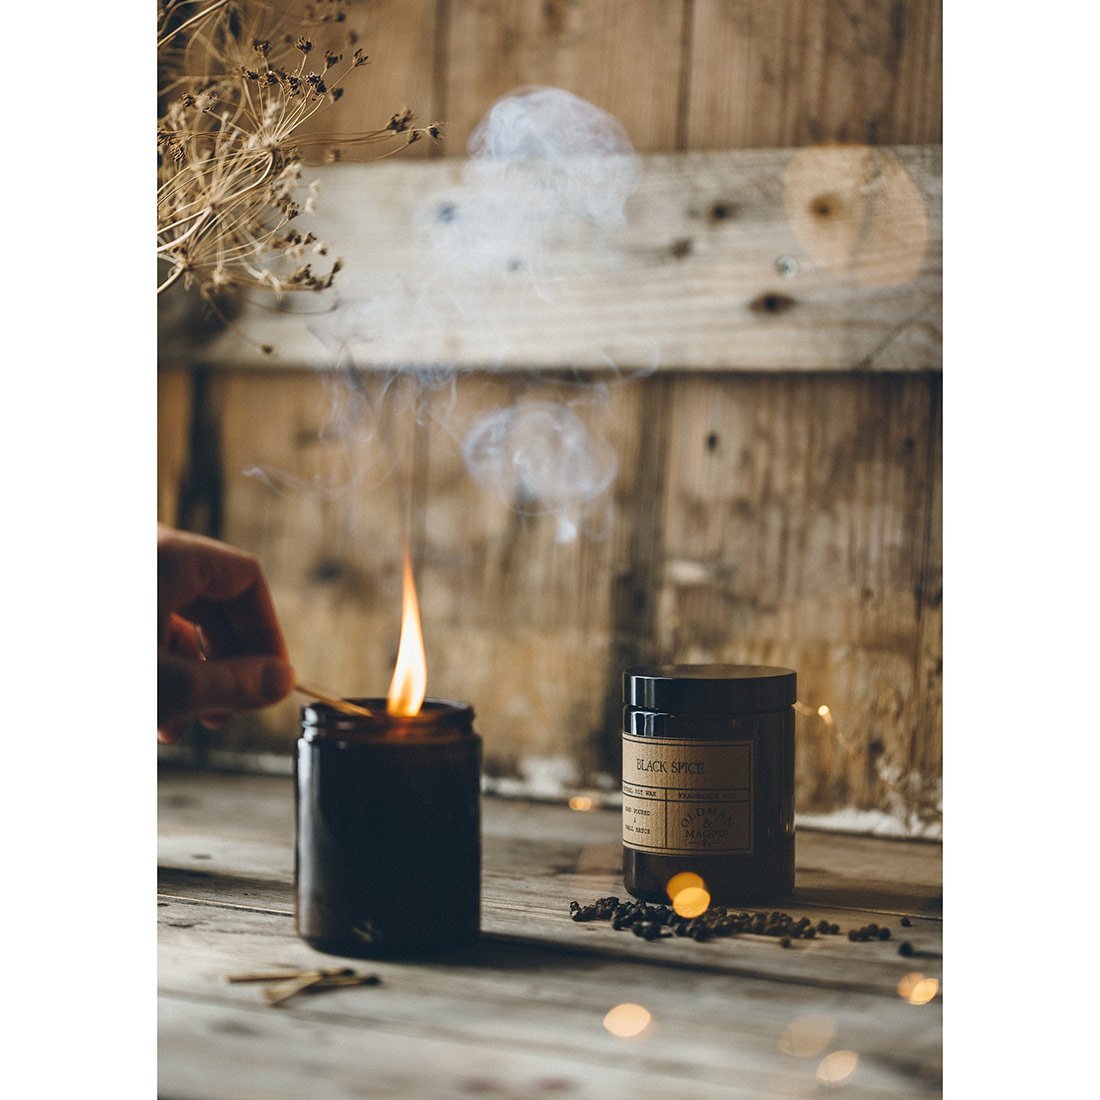 Black Spice Soy Wax Candle